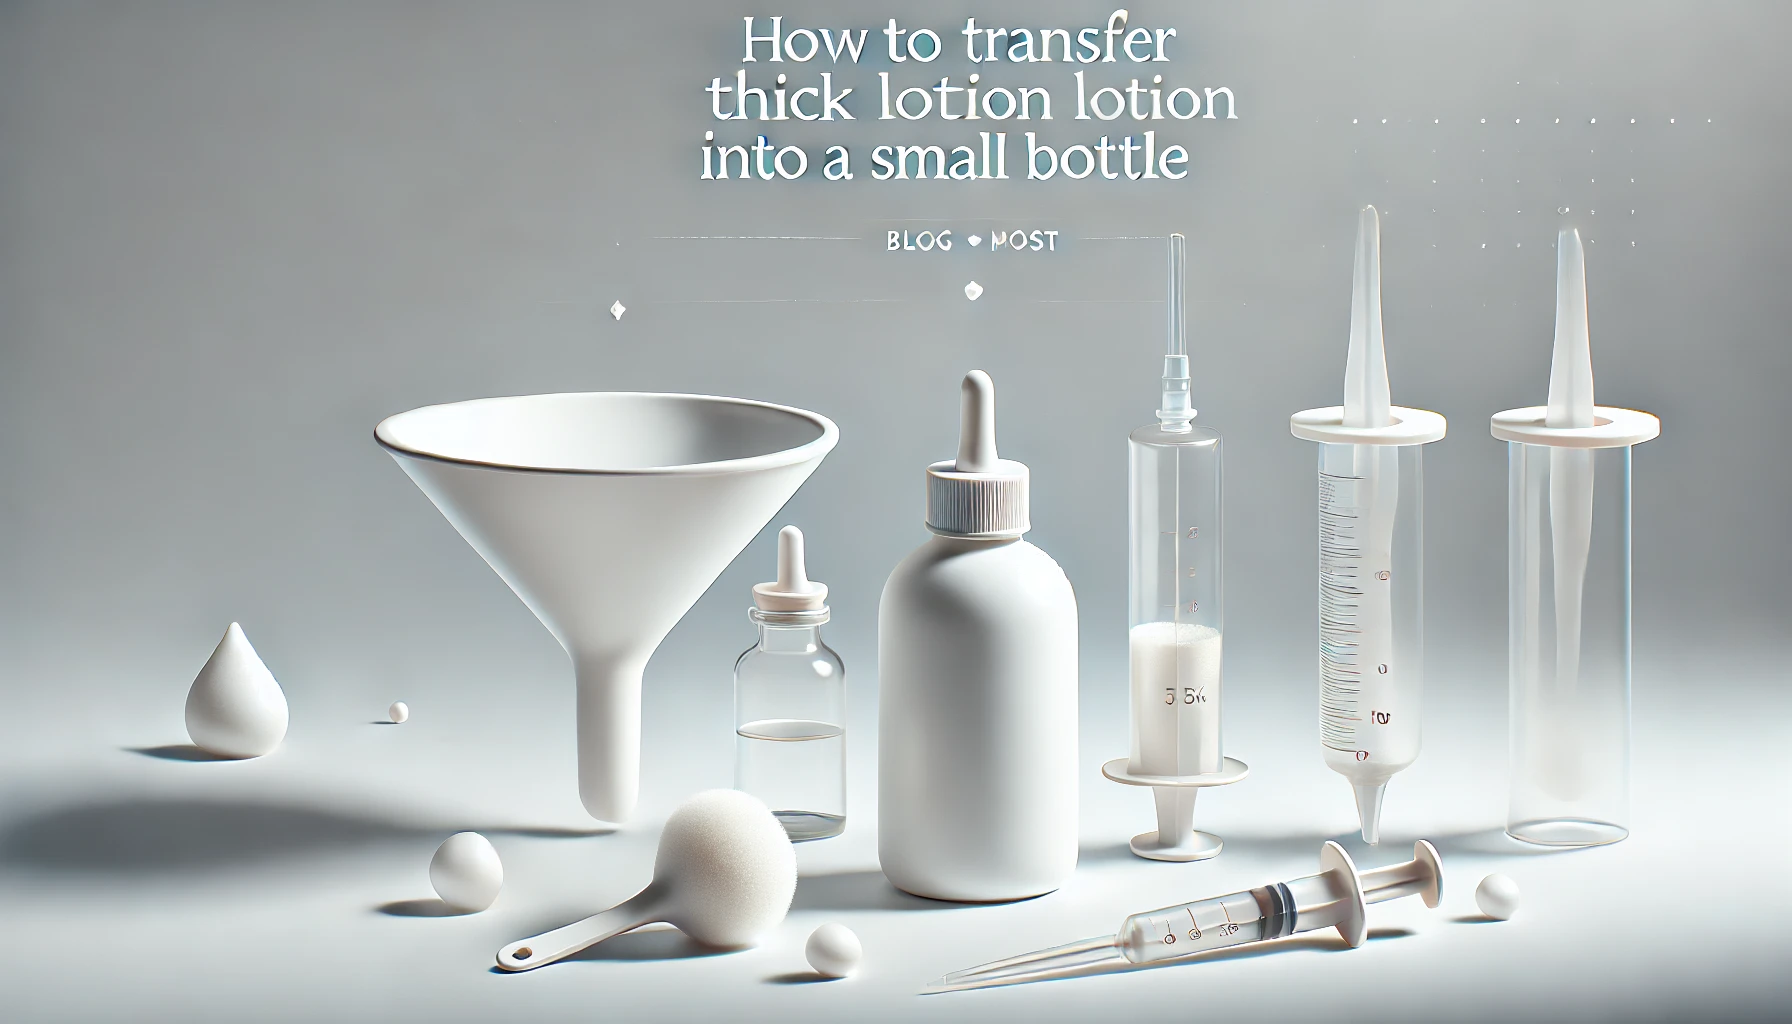 How to Transfer Thick Lotion into a Small Bottle